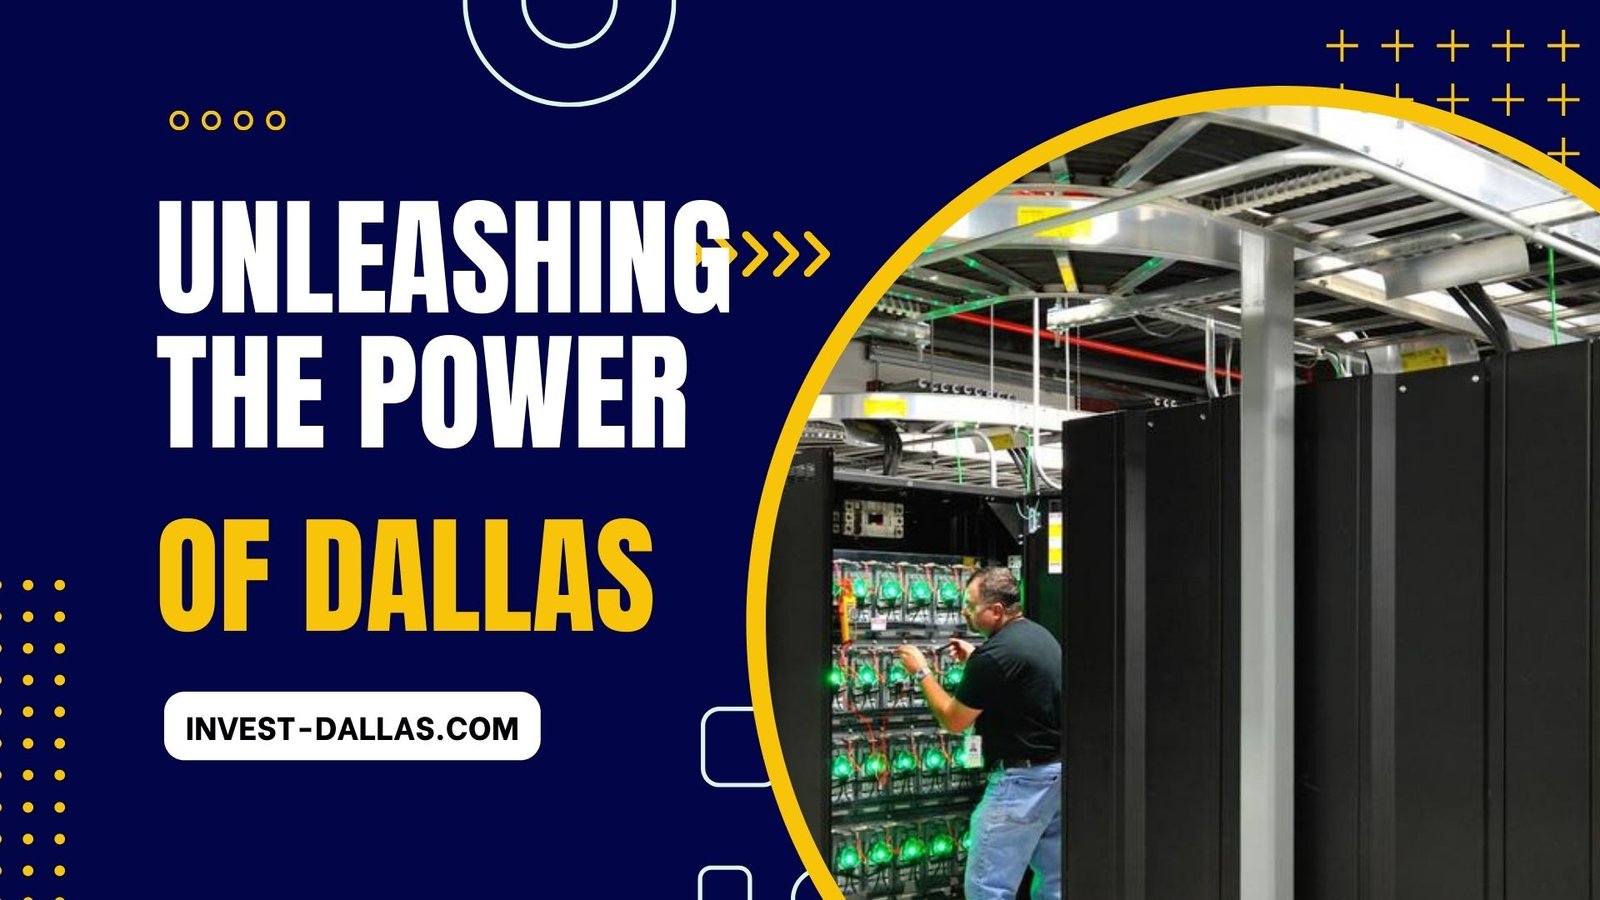 Dallas's dominance in the data center industry